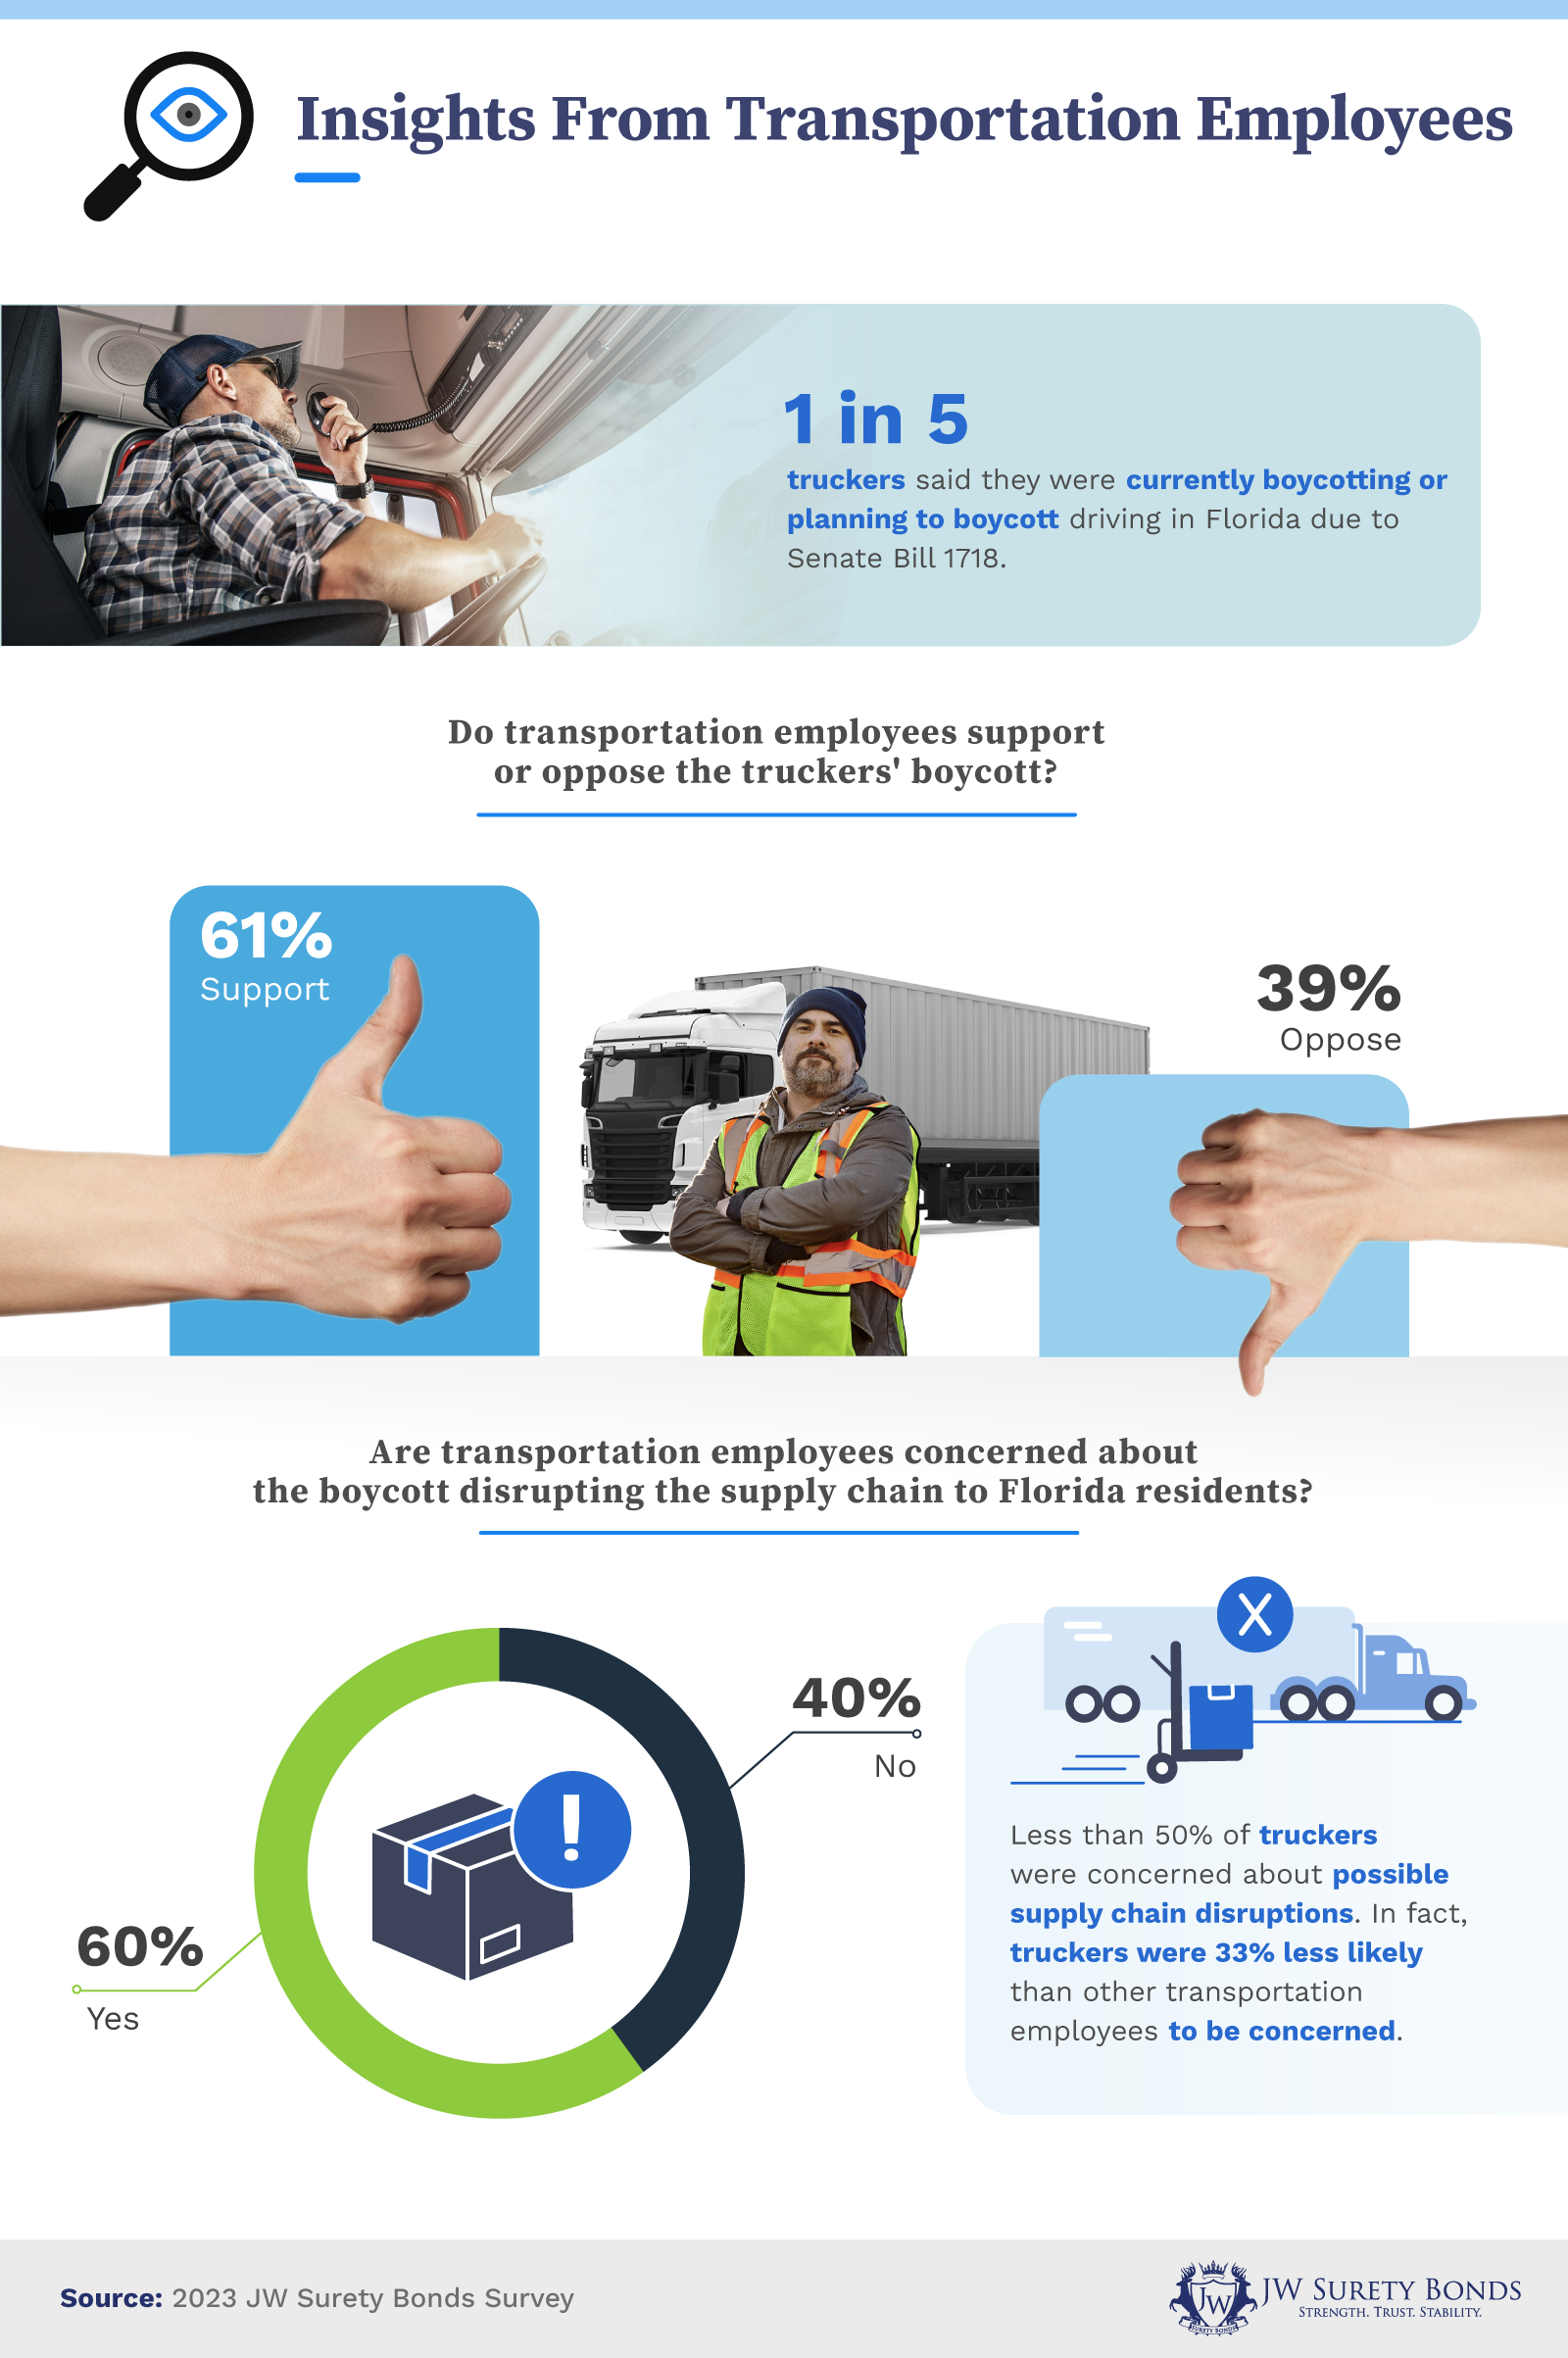 This infographic explores support and concerns relating to a trucking boycott from senate bill 1718.